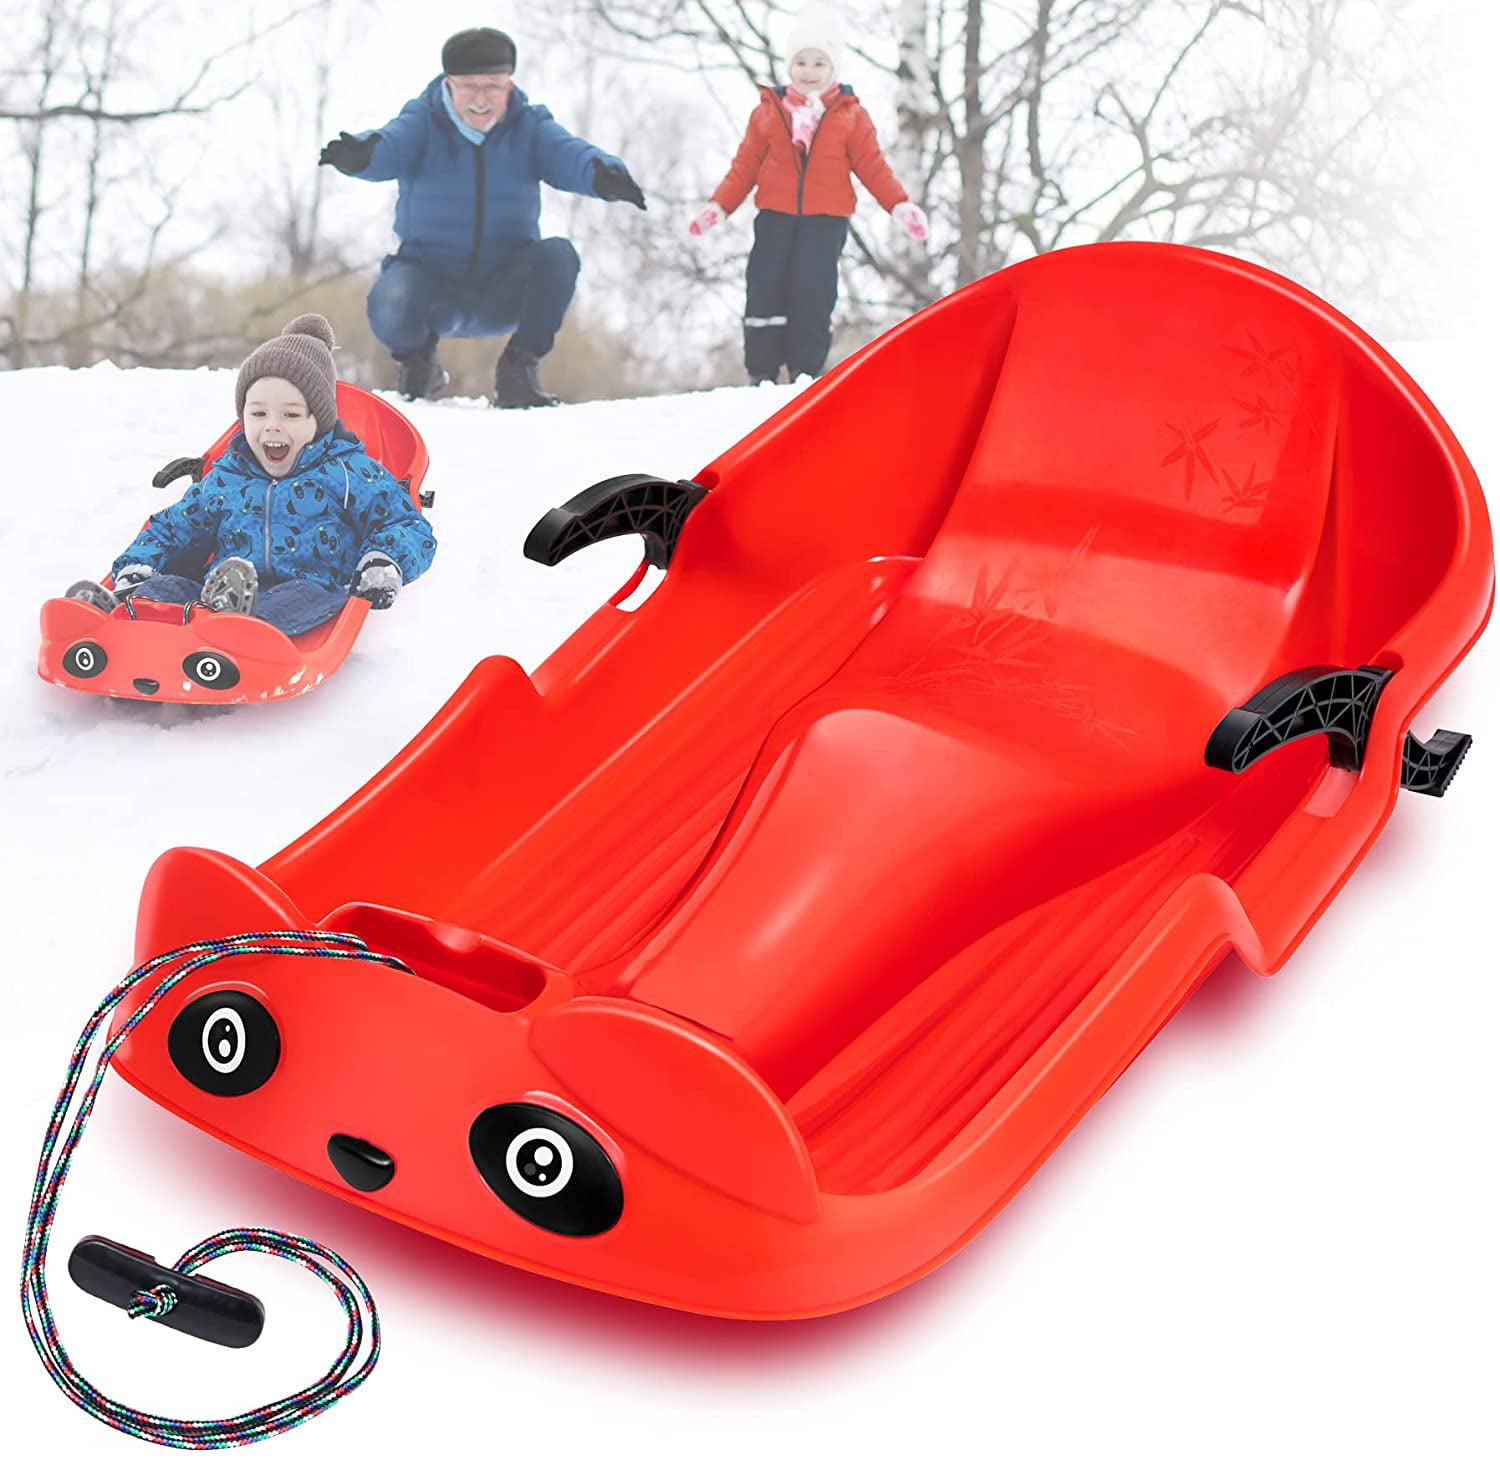 Outdoor Kids Downhill Pull Sled Sand Grass Skiing Snowboard Boat Sleigh with Brakes Comfortable Pull Rope Winter Snow Sled Toboggan 